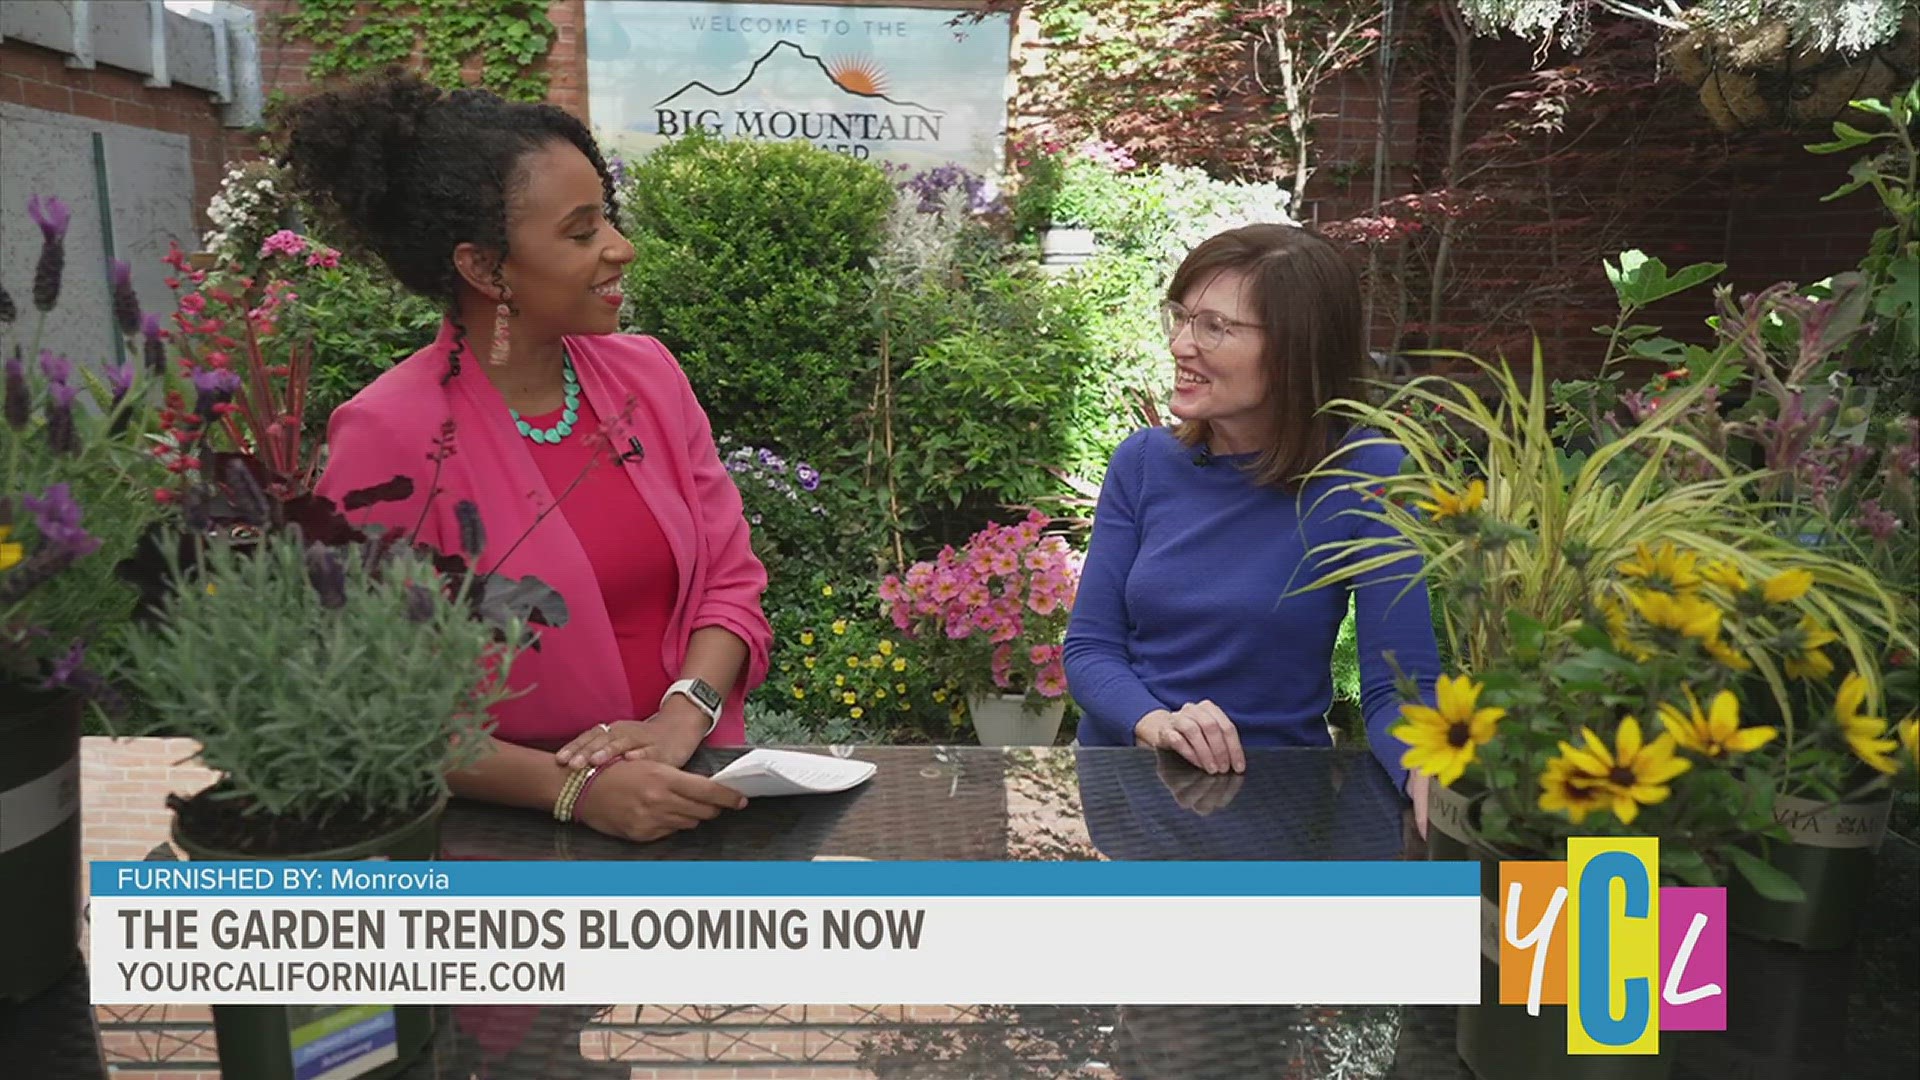 Fads may come and go, but several garden trends are here to stay, and for good reason. Find out what the favorites are.